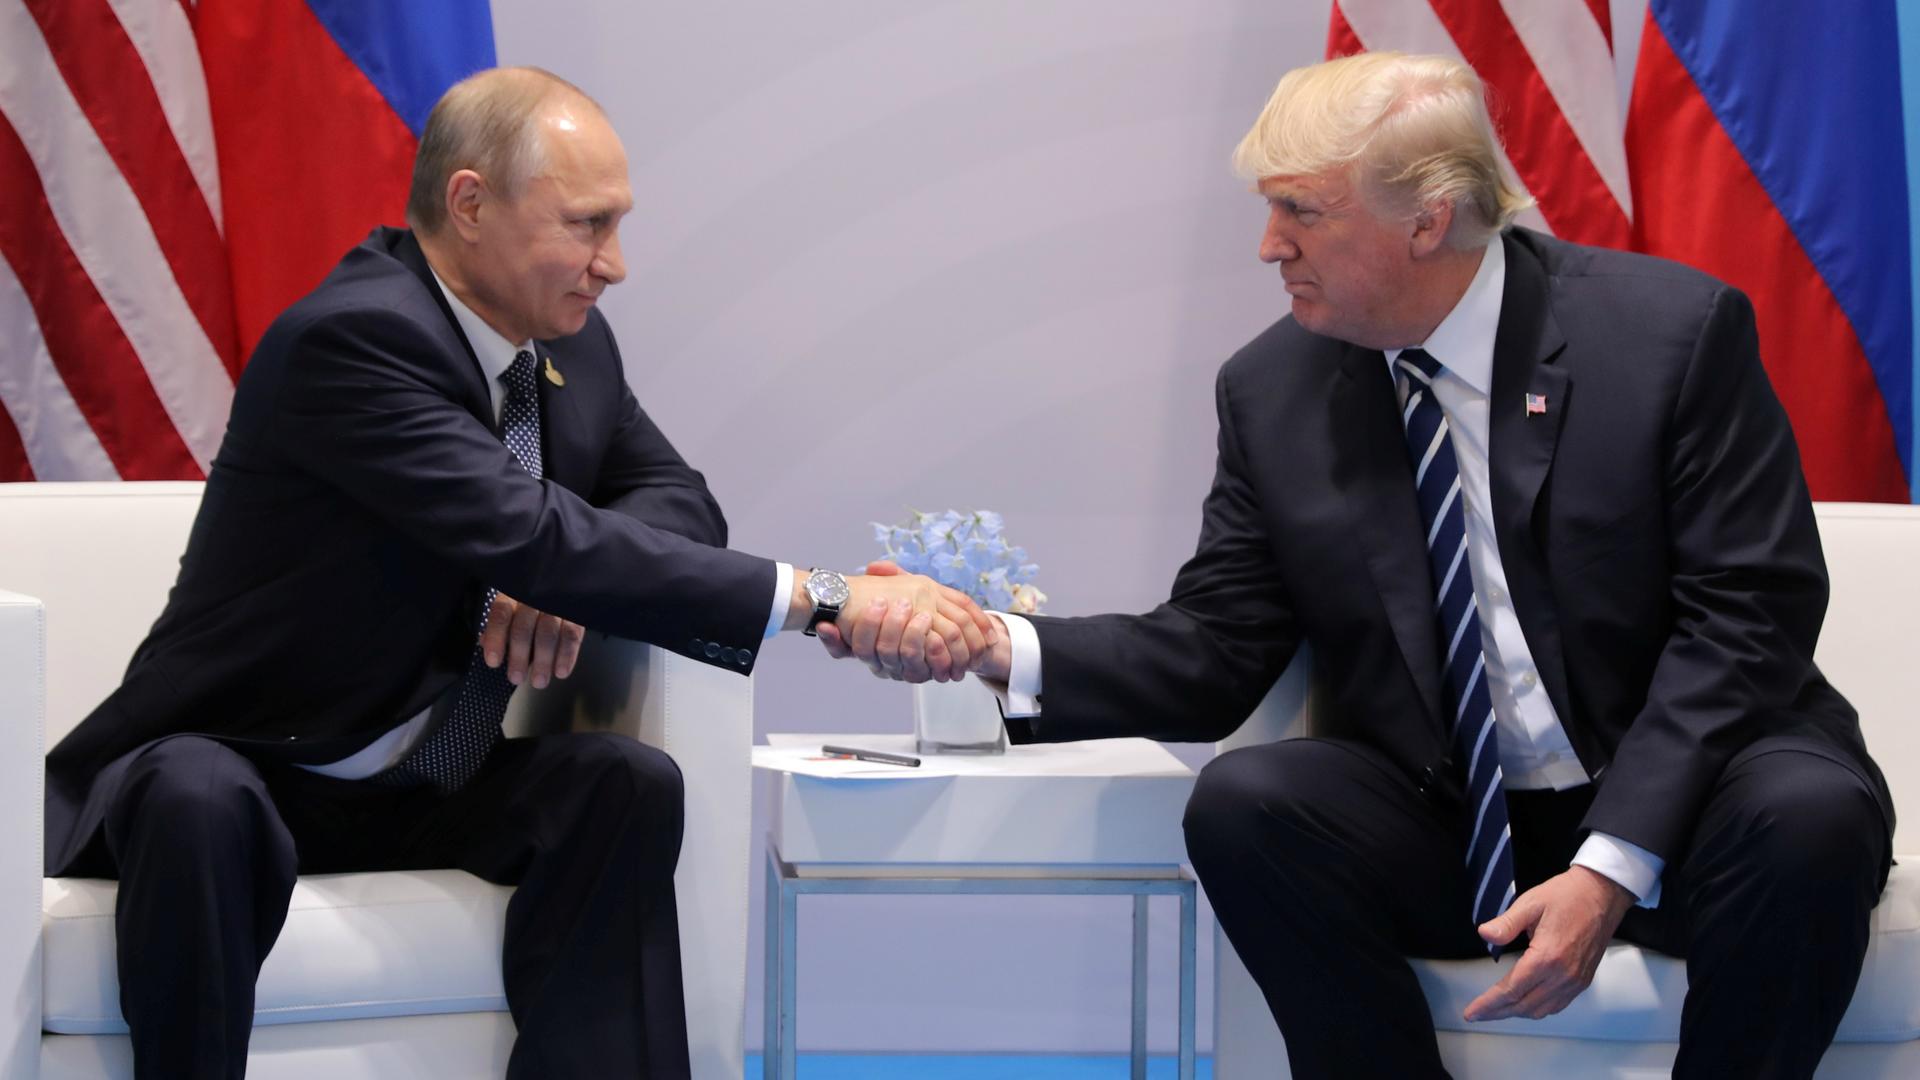 President Donald Trump shakes hands with Russian President Vladimir Putin during their bilateral meeting at the G20 summit in Hamburg, Germany, July 7, 2017.